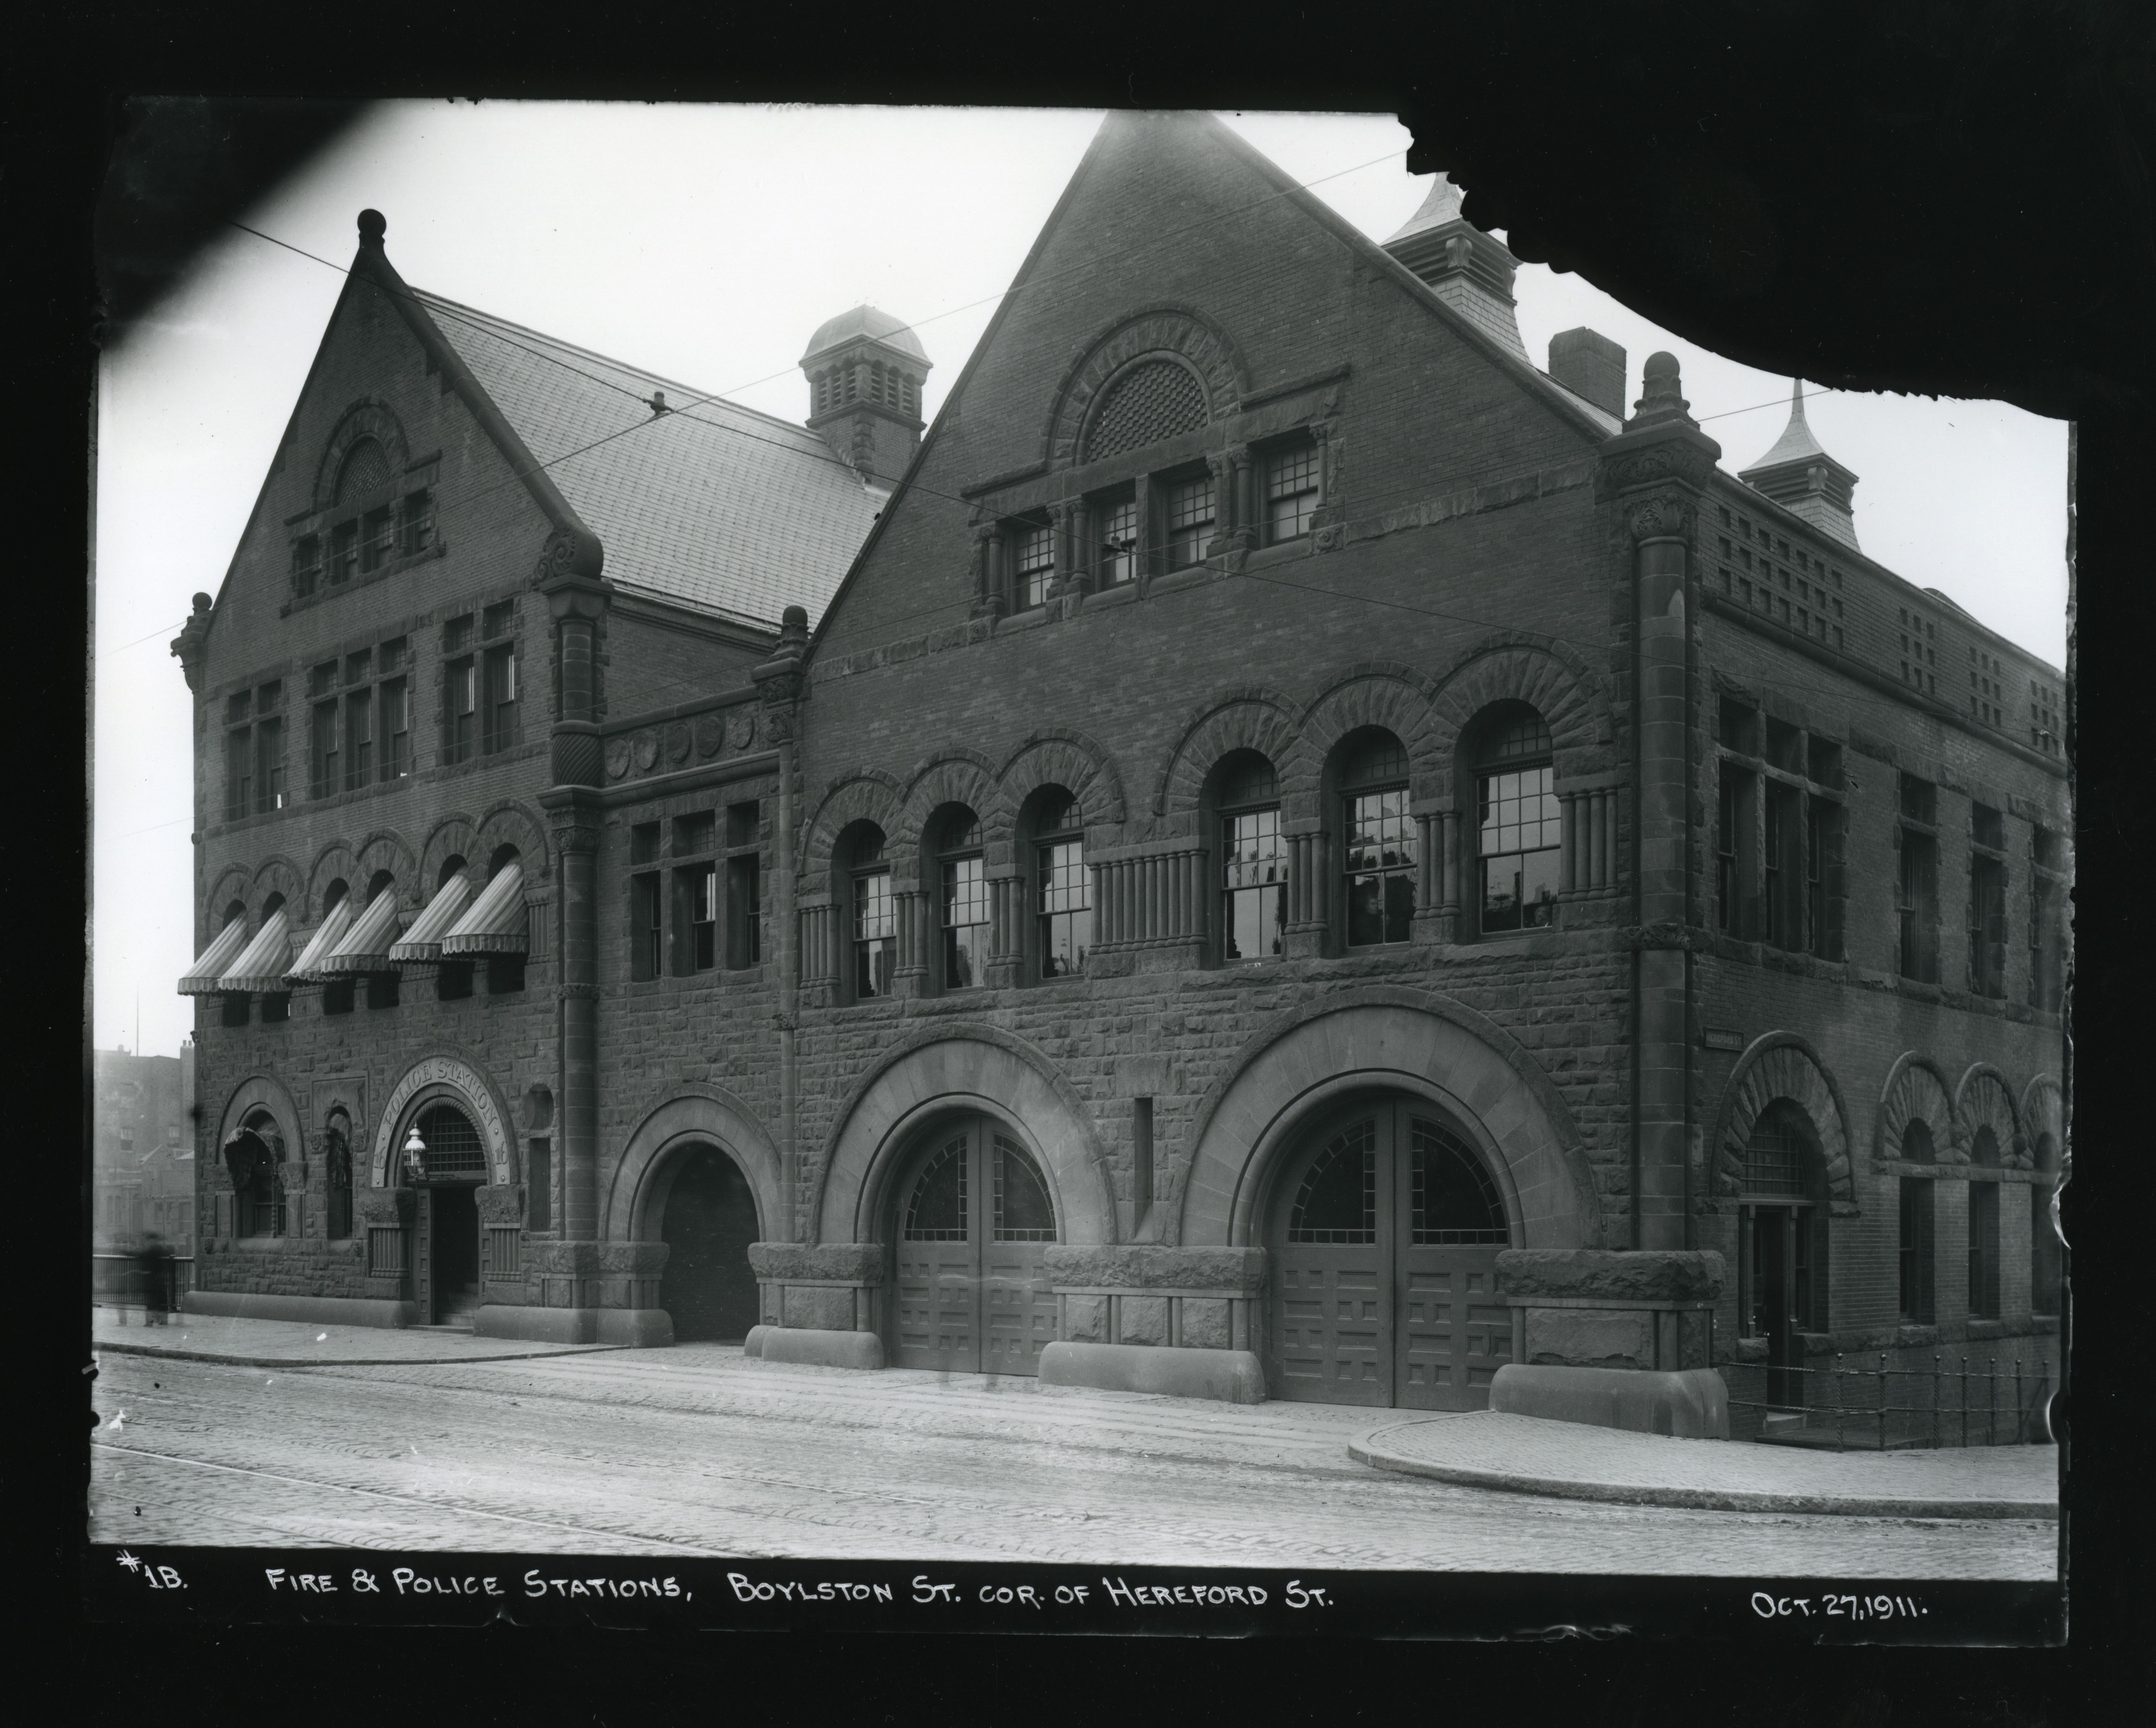 Image of Fire and Police Stations on the corner of Boylston Street and Hereford Street